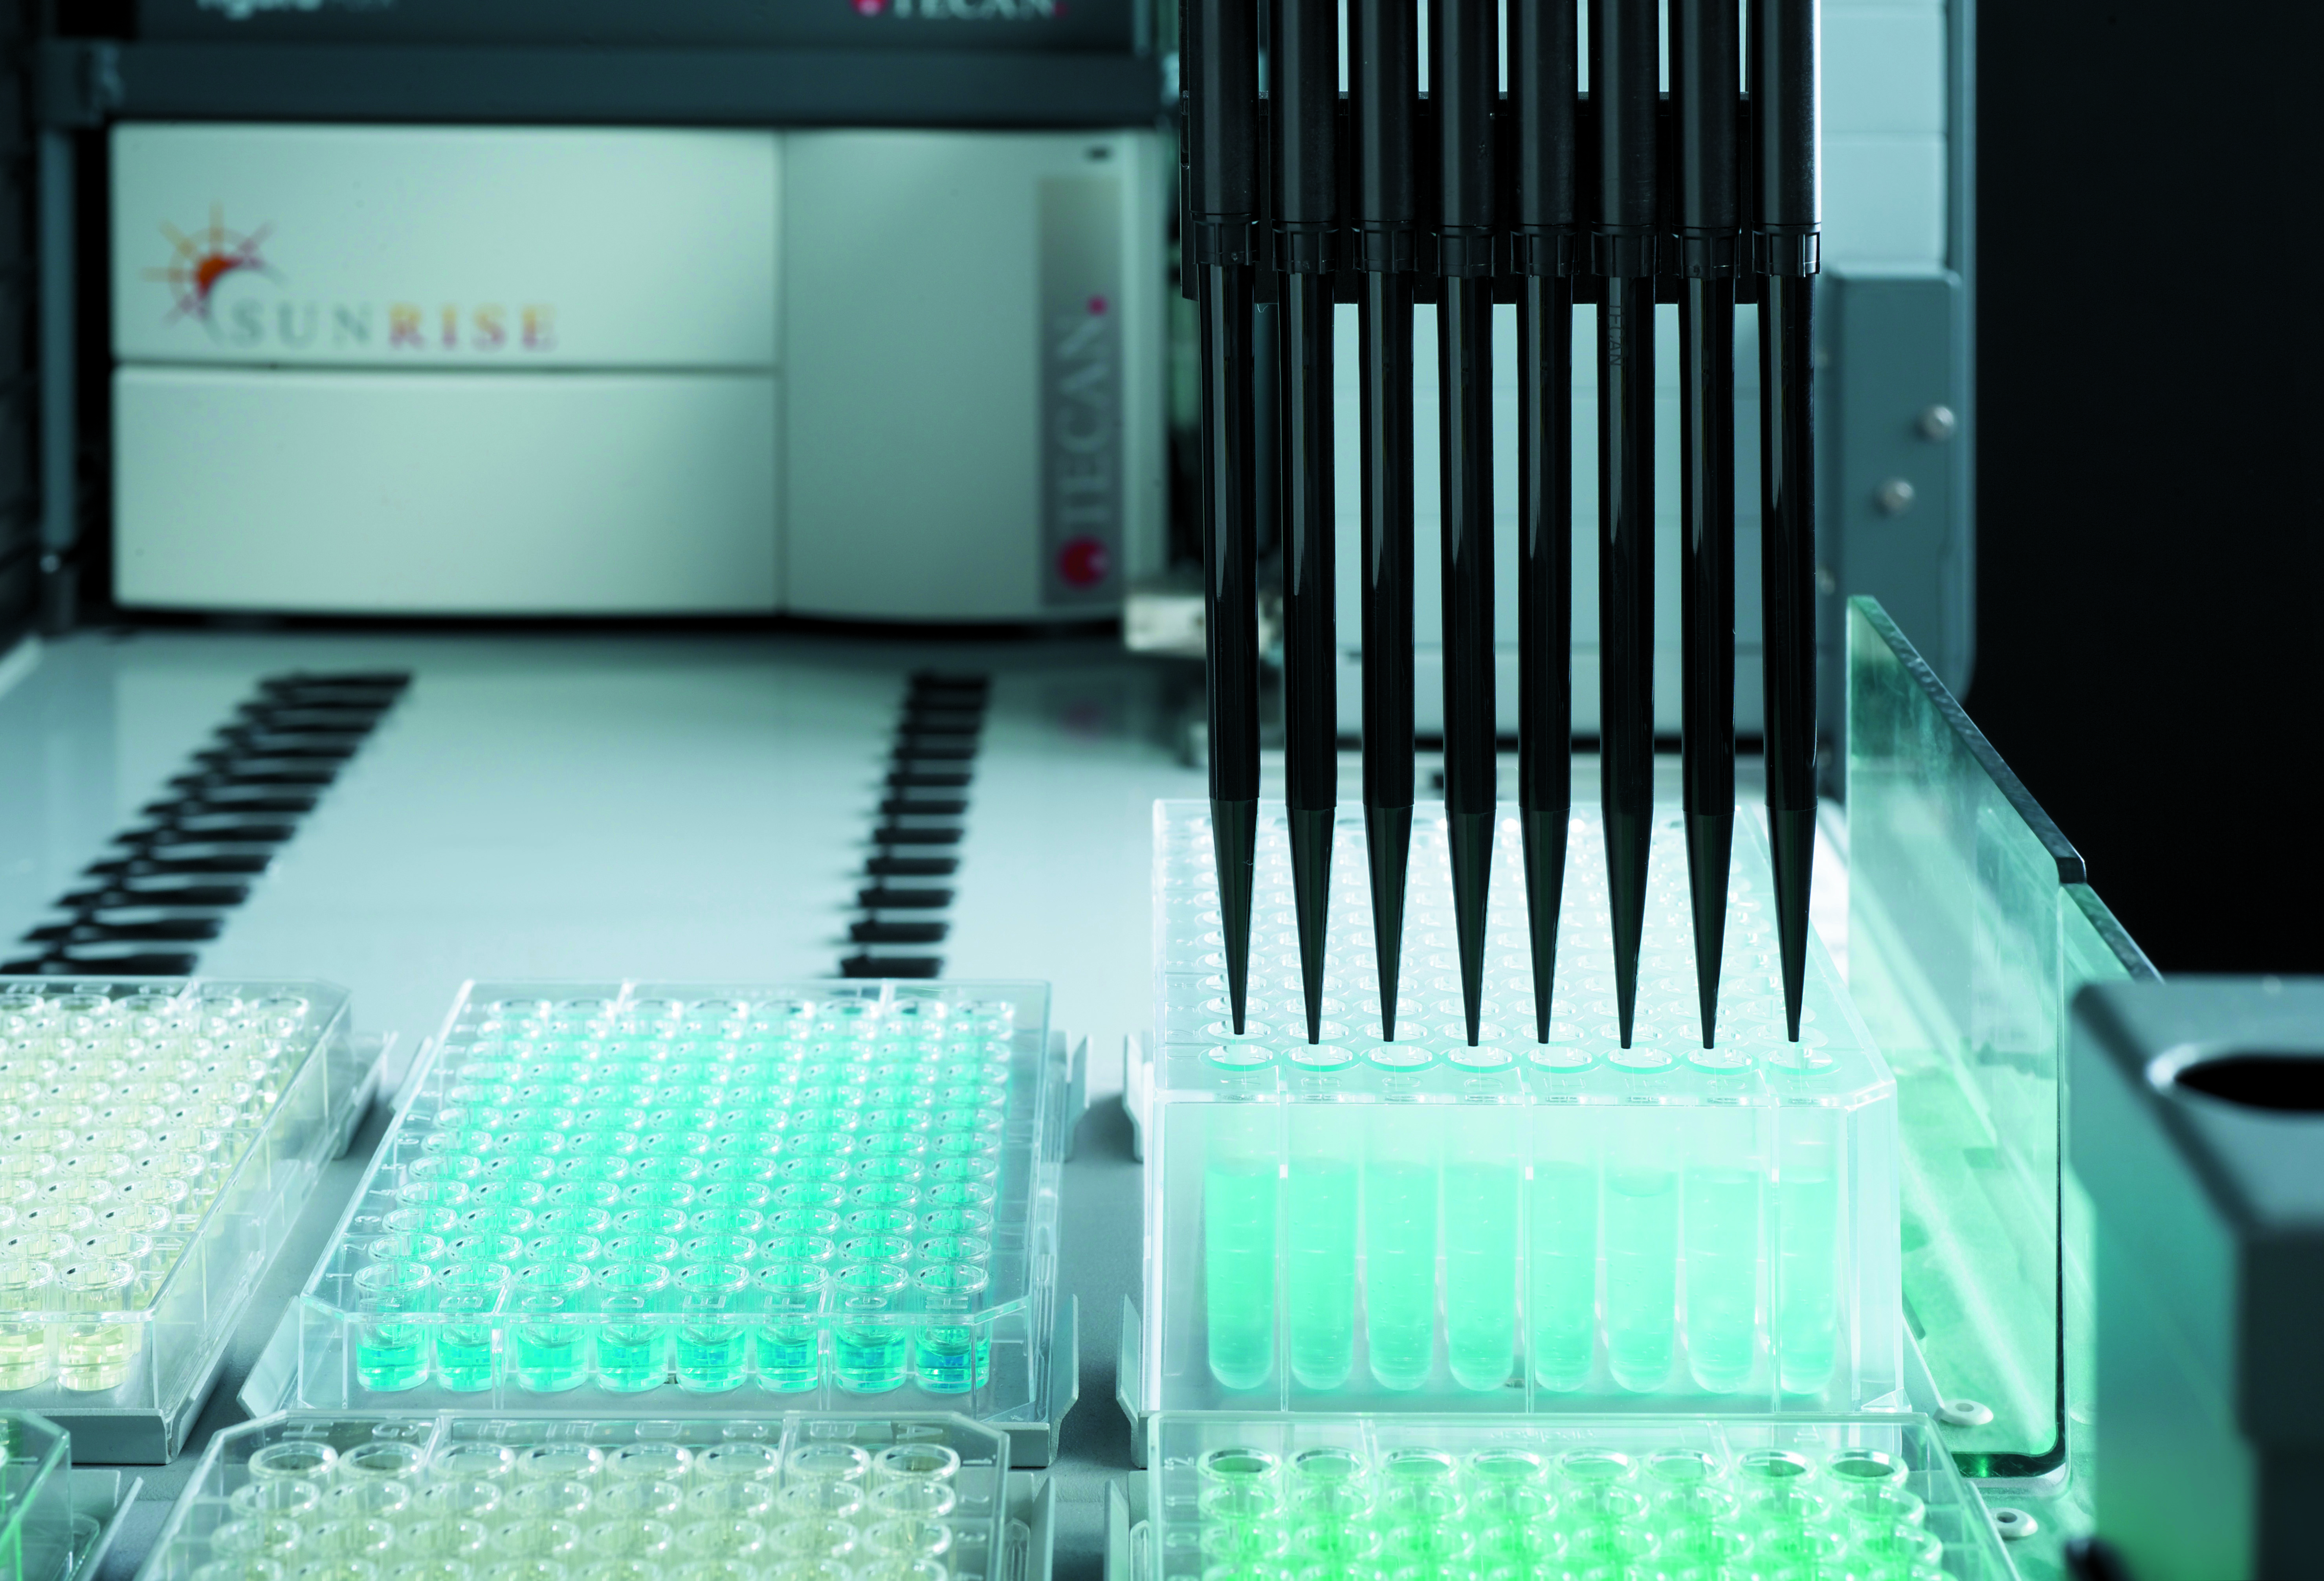 For data reproducibility: automation of ELISA test kit protocols wins 26631688280